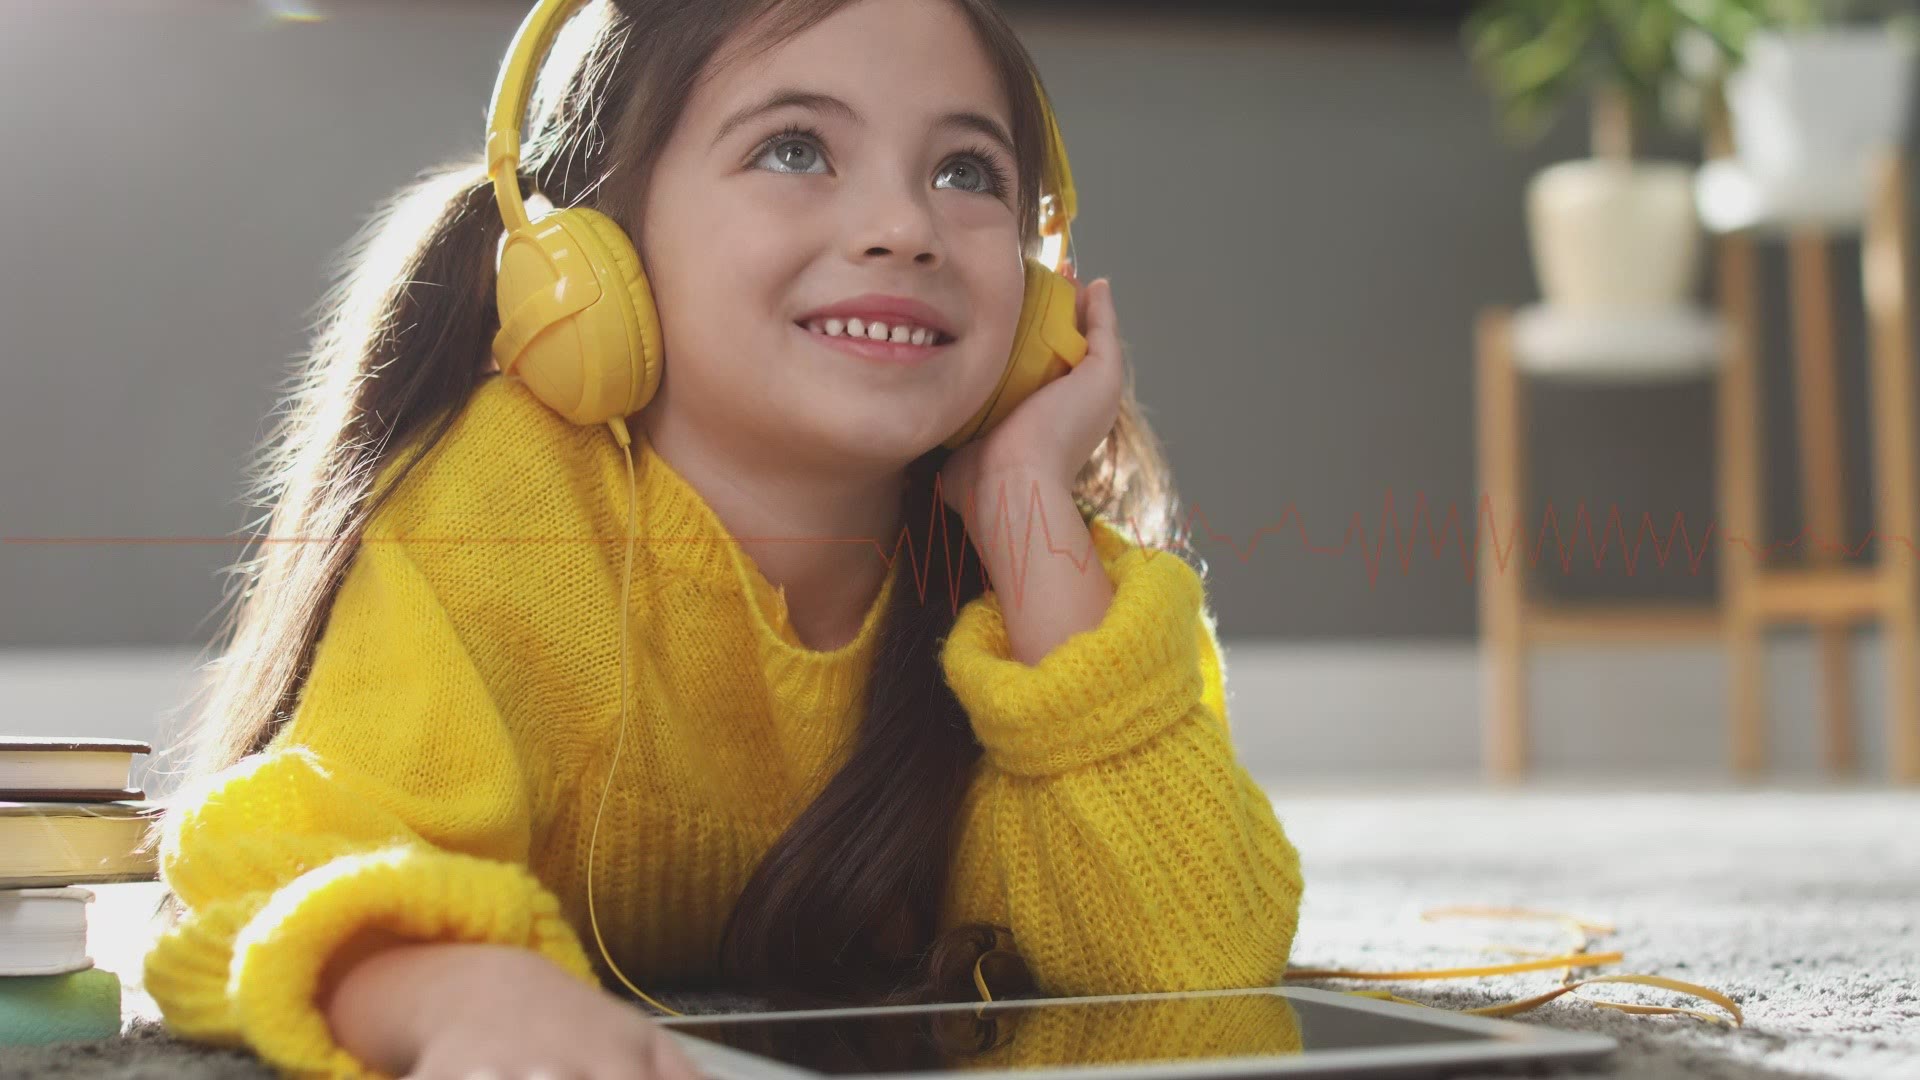 "We have had a mad influx this year of kids with tinnitus," or ringing in ears, said Lisa Vaughan of Cook Children's. She said headphones are to blame.